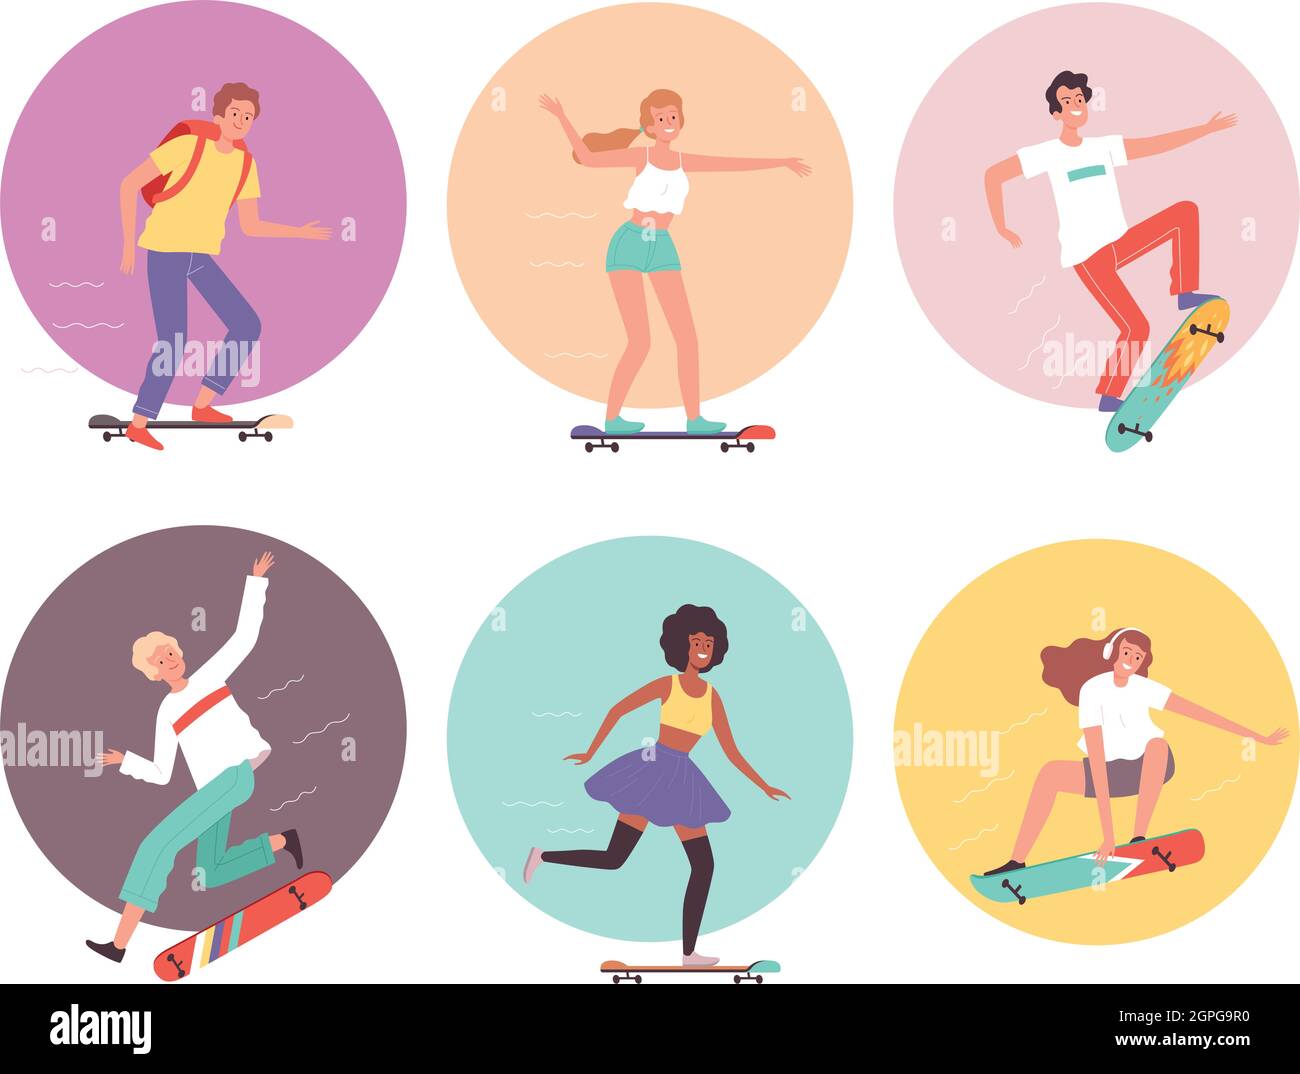 Skateboarders. Urban activity hipsters characters riders on skateboard cool guys vector illustrations Stock Vector